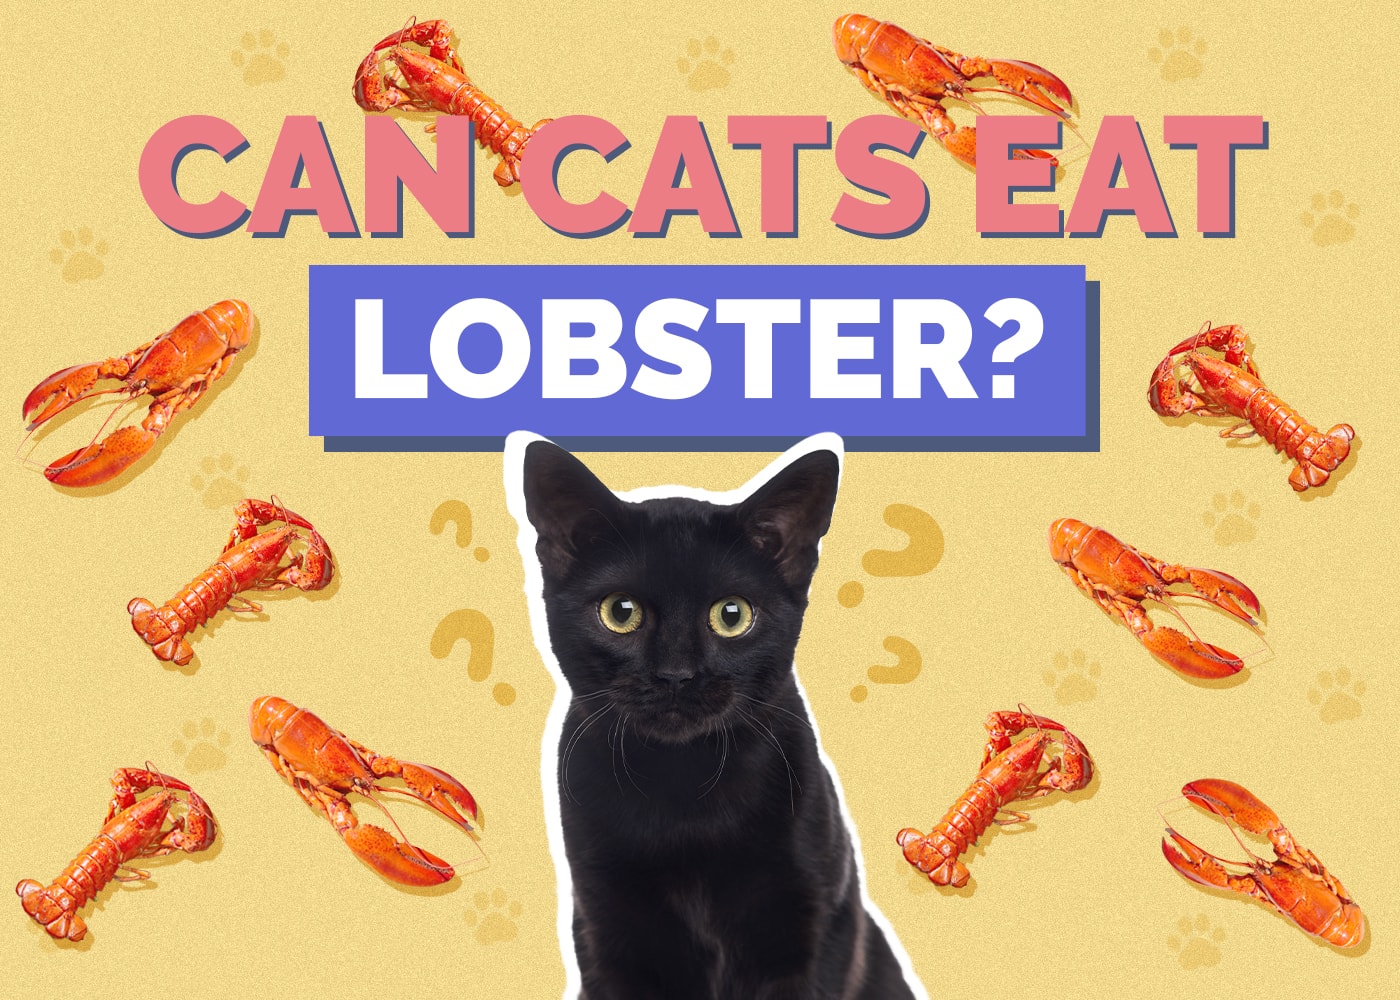 Can Cats Eat lobster